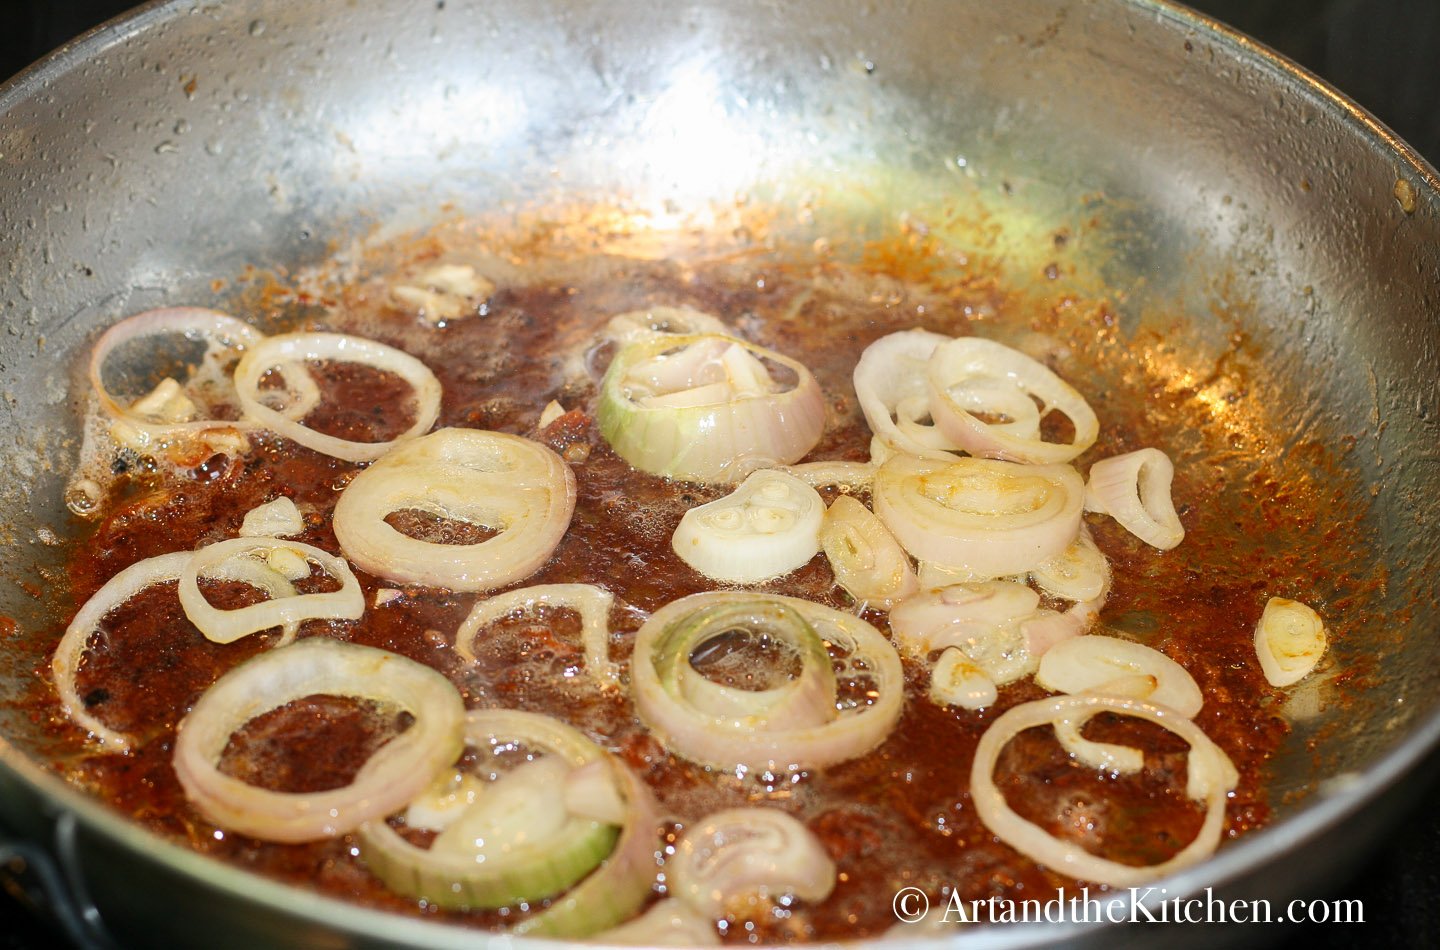 sliced shallots sautéing in skillet with browned bits from searing chicken.